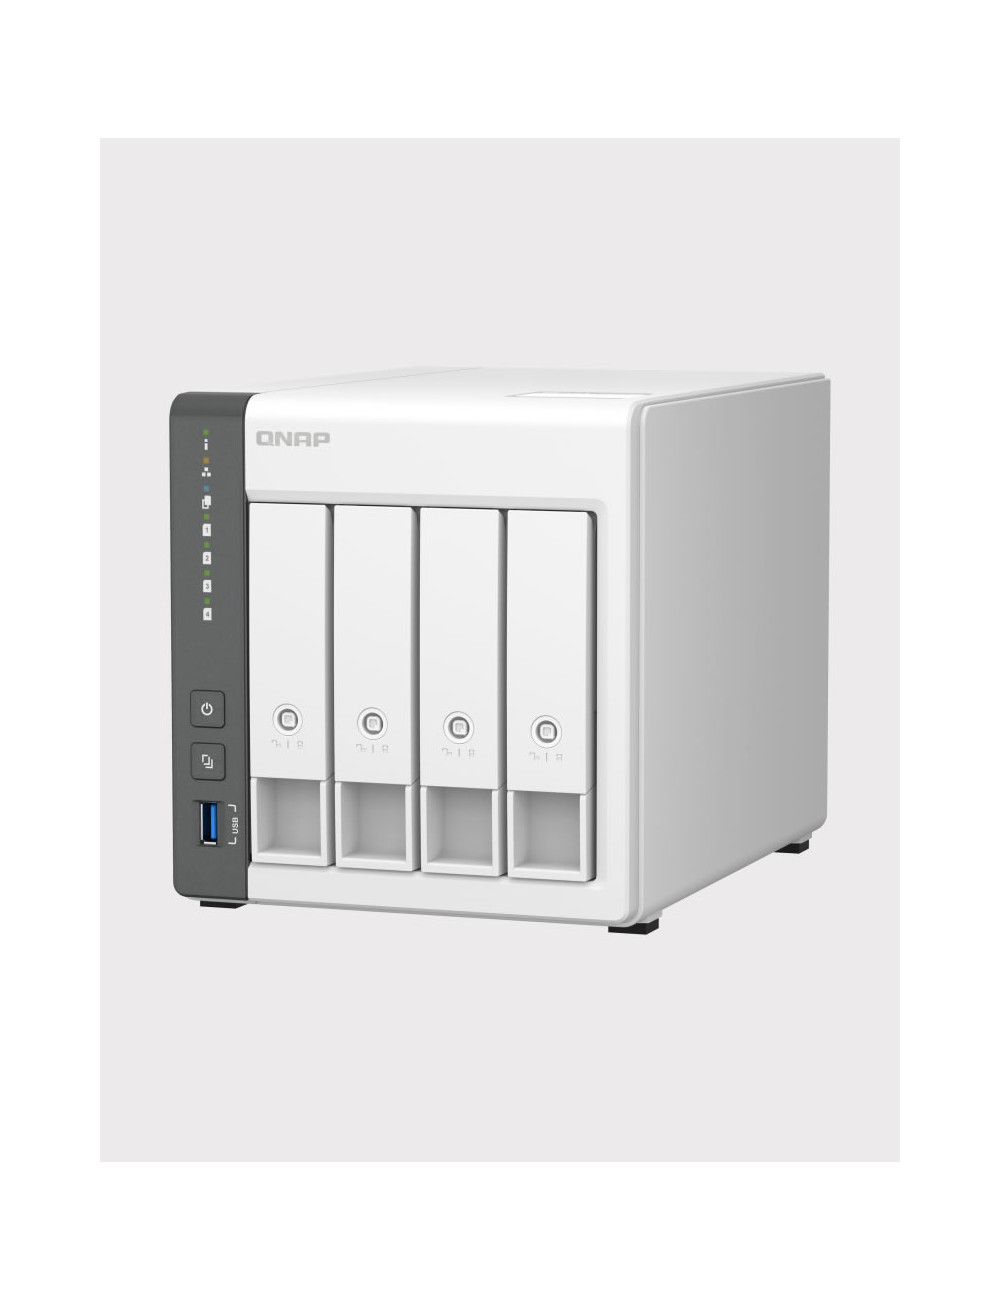 Synology DX517 Unité d'extension IRONWOLF PRO 40To (5x8To)